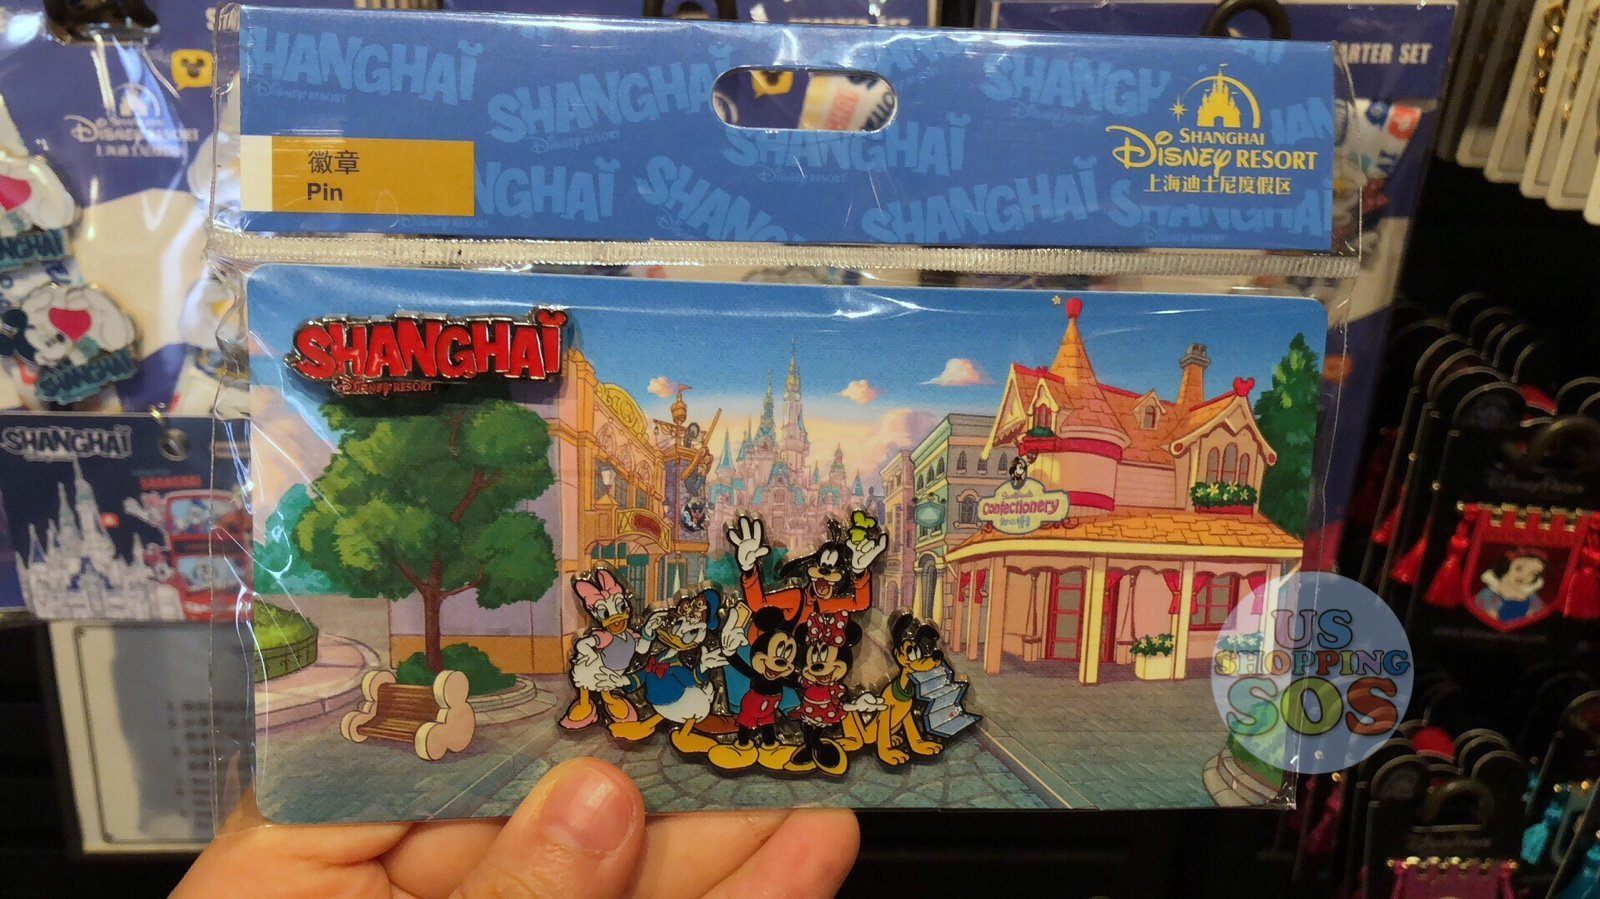 SHDL - I Mickey SH Collection - Pin x Post Card "Mickey & Friends"